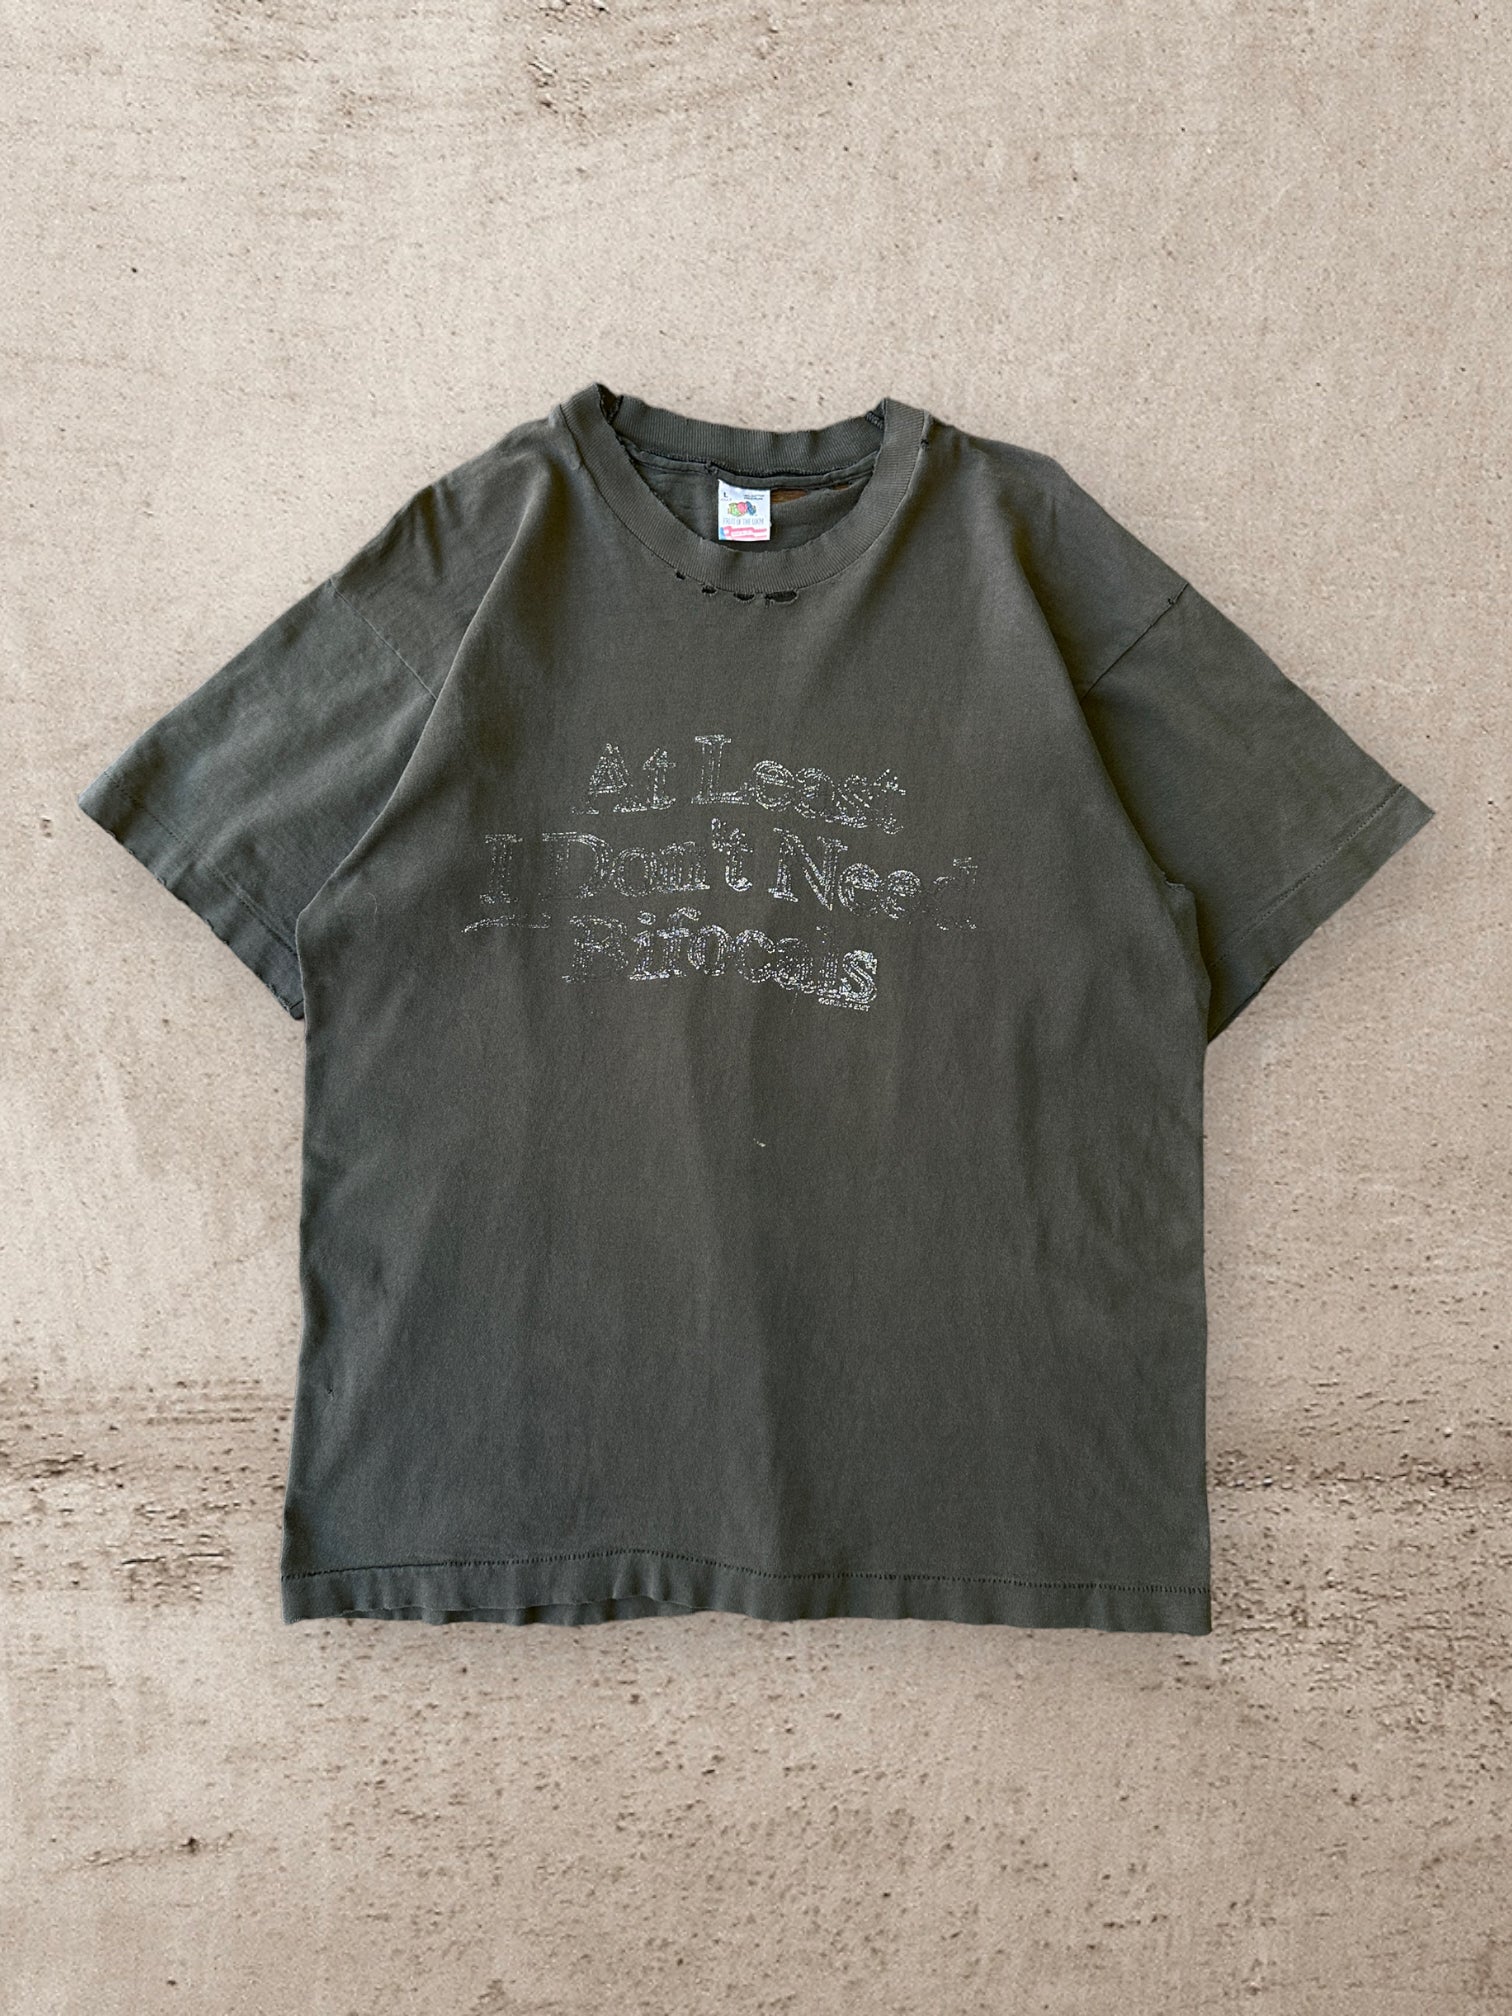 90s Distressed "At Least  I Don't Need Bifocals" T-Shirt - Large